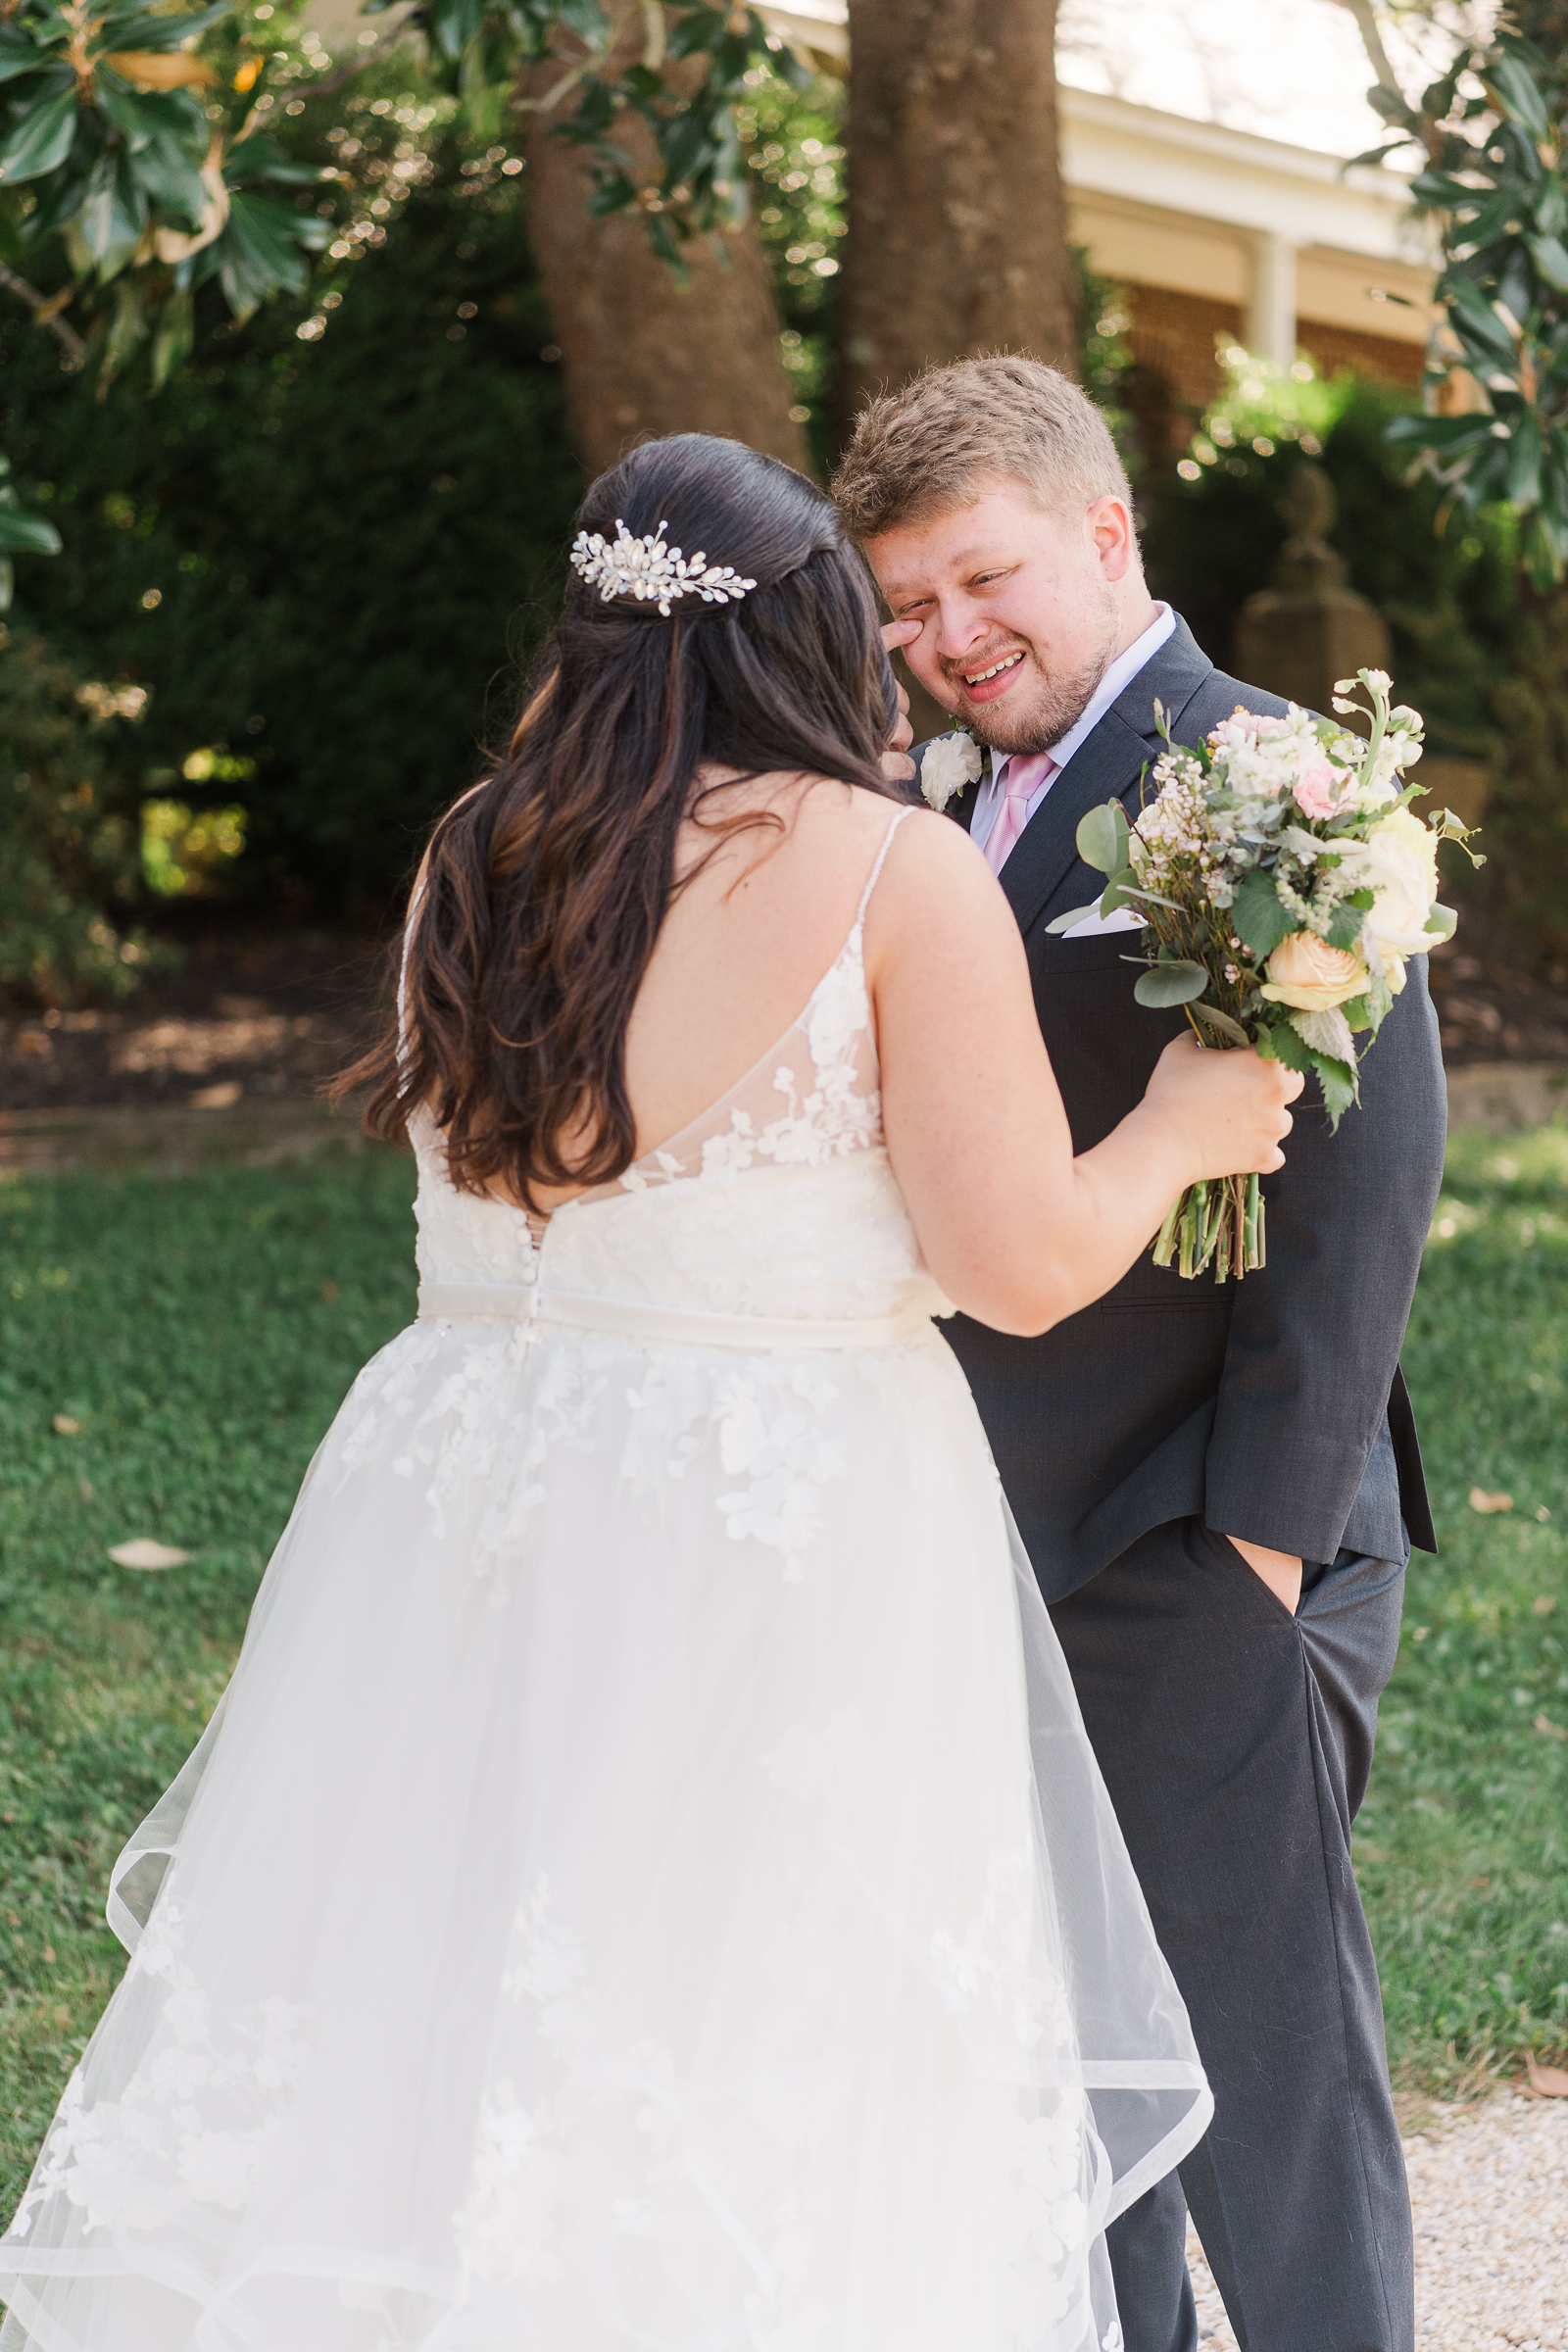 Emotional Bride and Groom First Look Portraits at Cumberland Estate Wedding. Photography by Richmond Wedding Photographer Kailey Brianne Photography. 